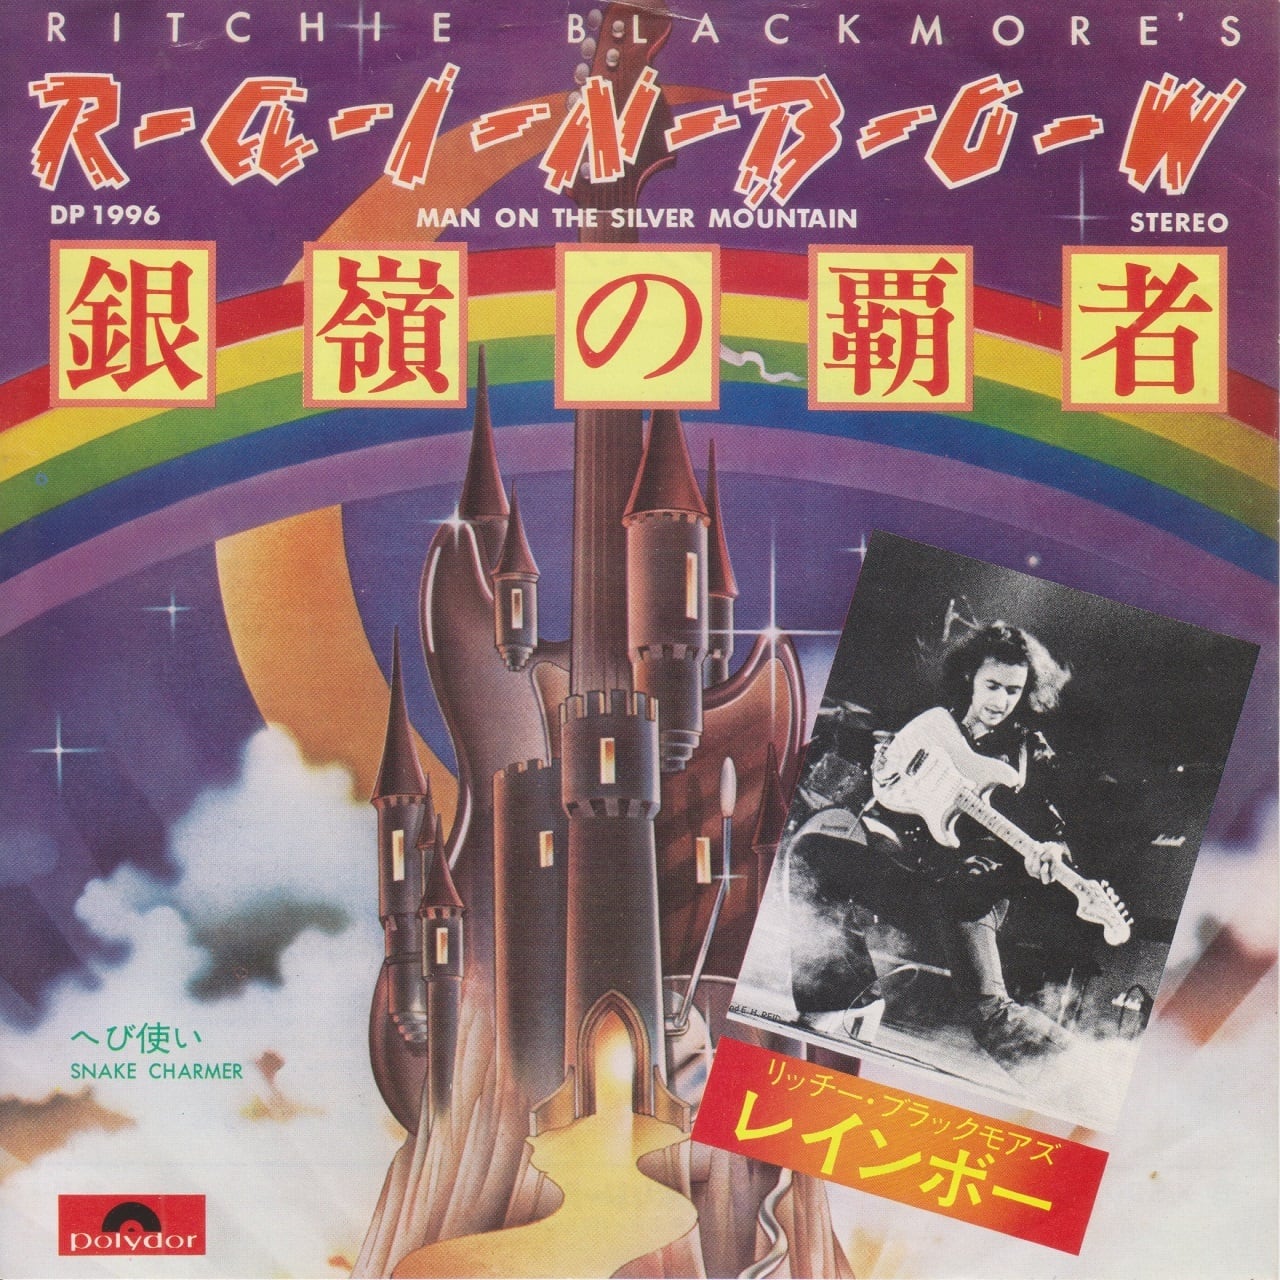 【7inch】Ritchie Blackmore's Rainbow - Man On The Silver Mountain  銀嶺の覇者／リッチー・ブラックモアズ・レインボー (1975) 45rpm